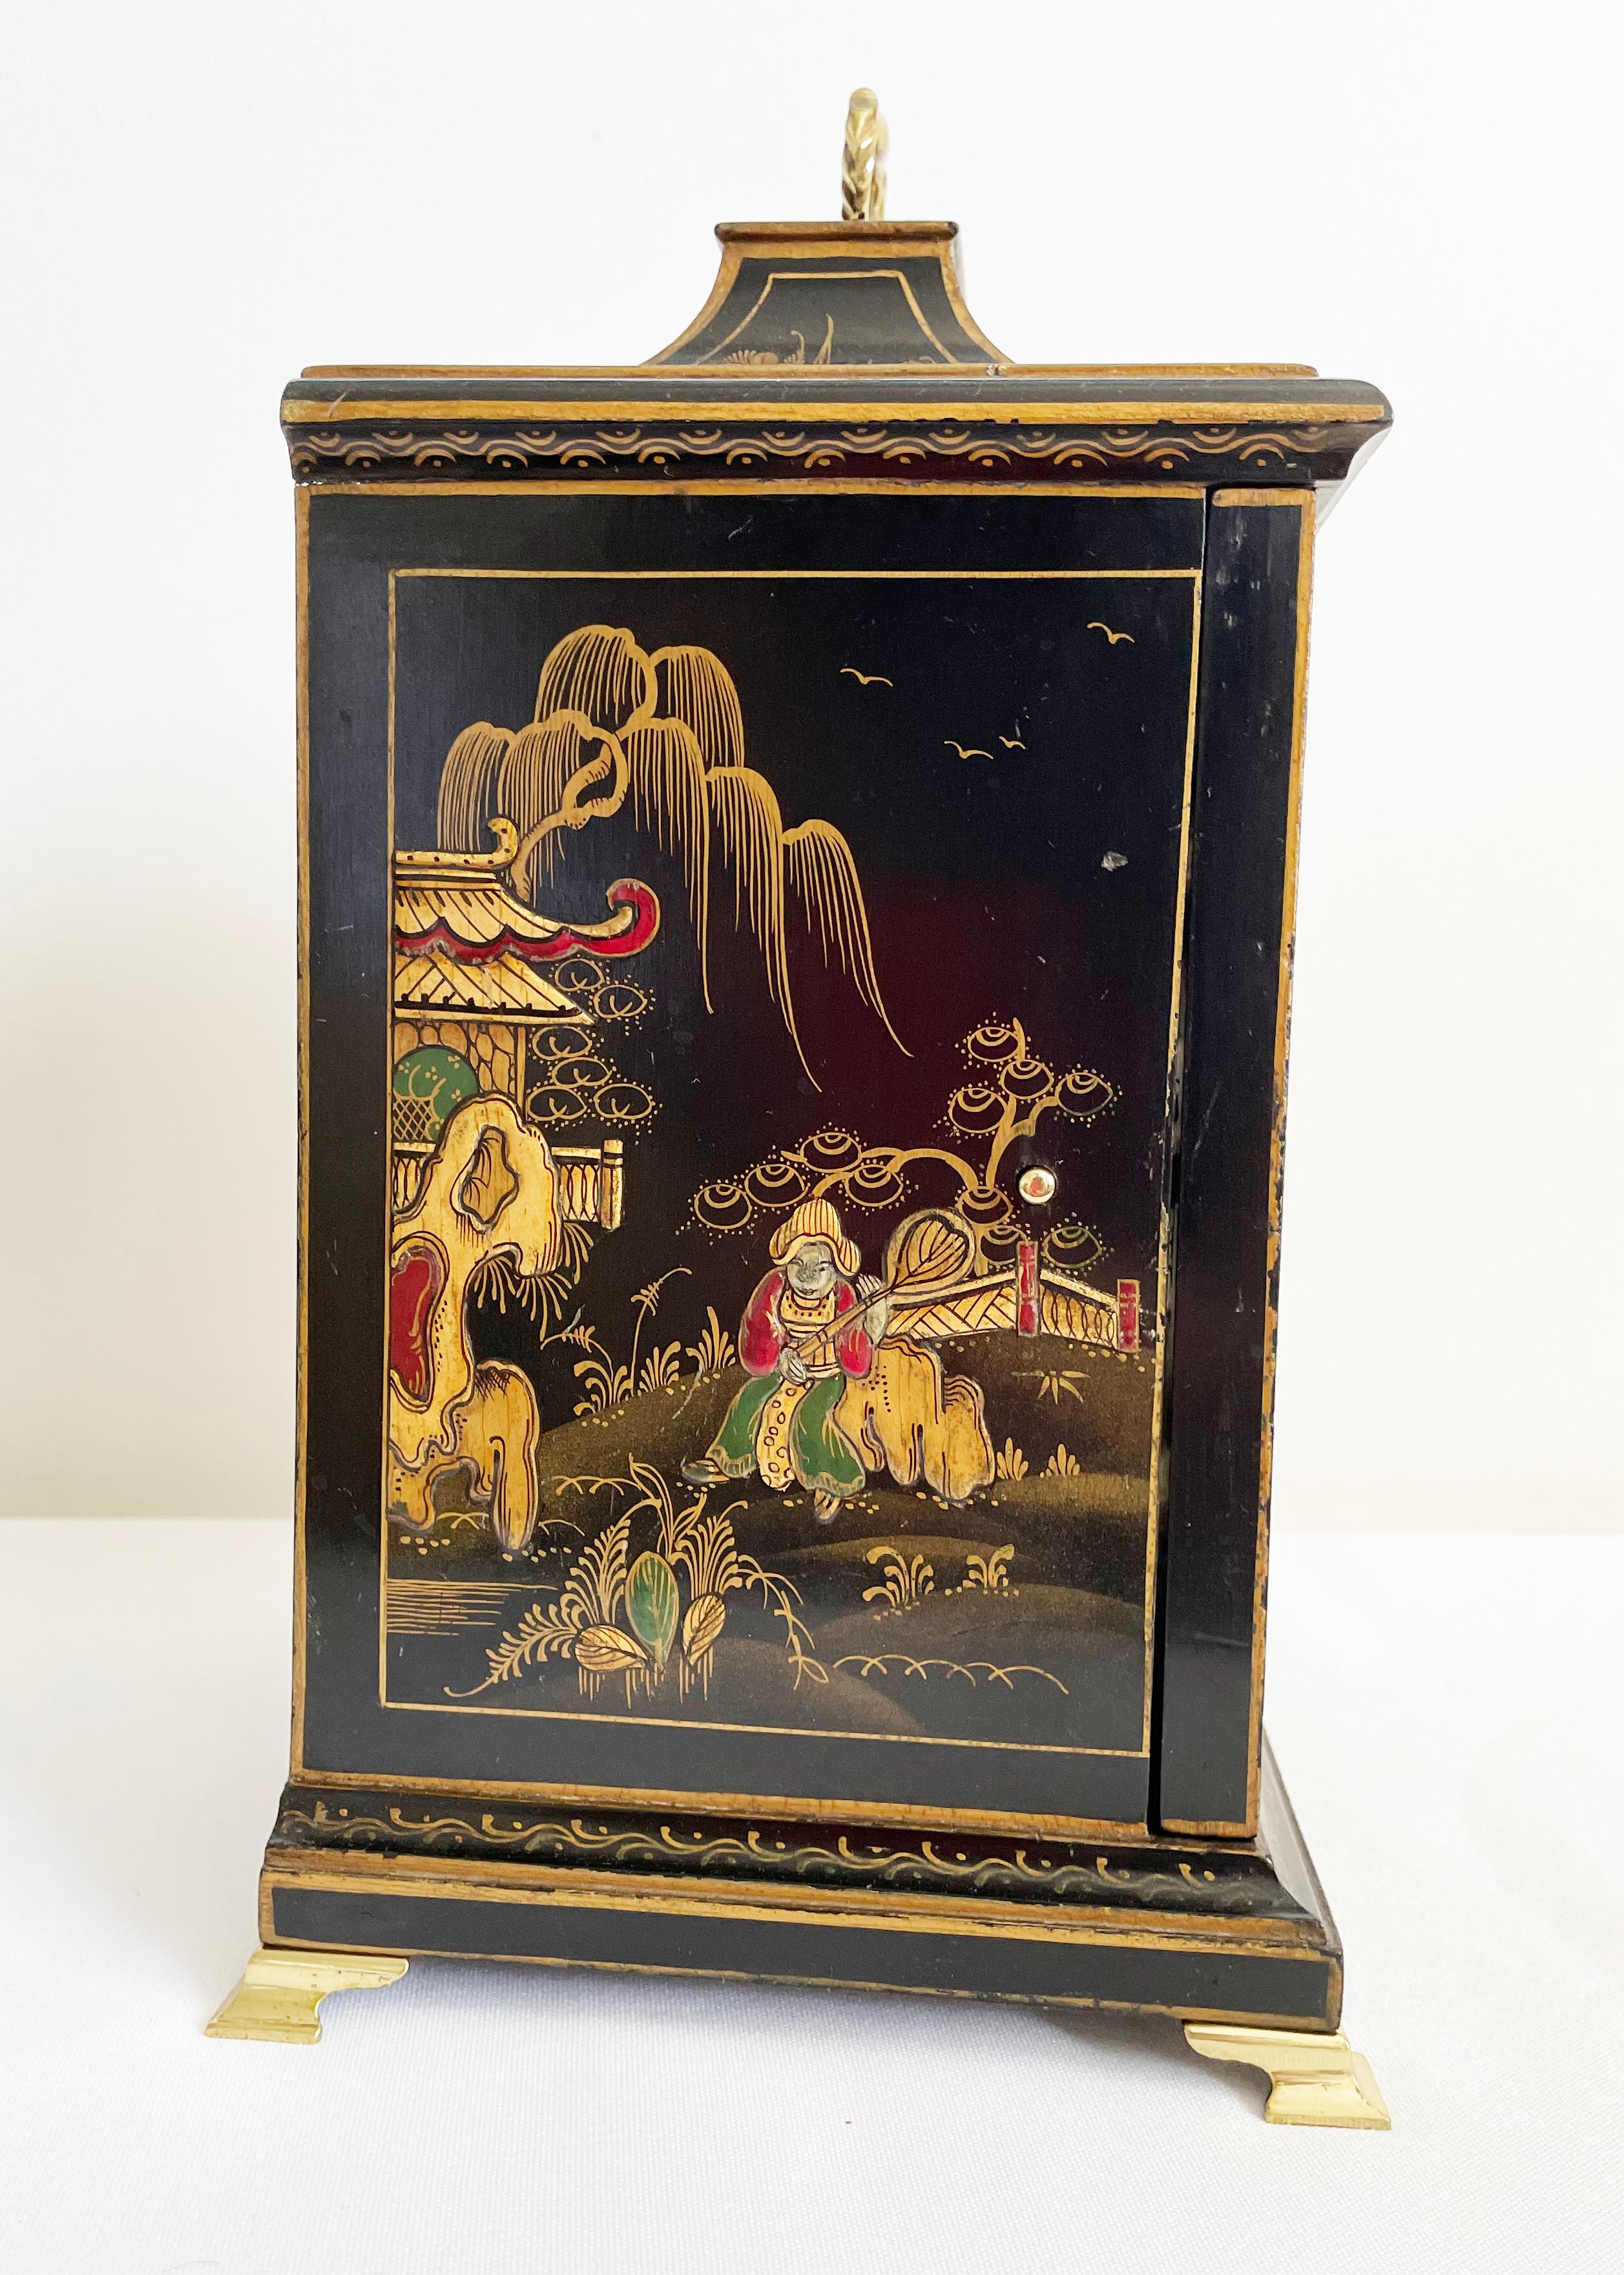 Painted Black Chinoiserie Mantel Clock In Georgian Style, French Movement, Circa 1930 For Sale